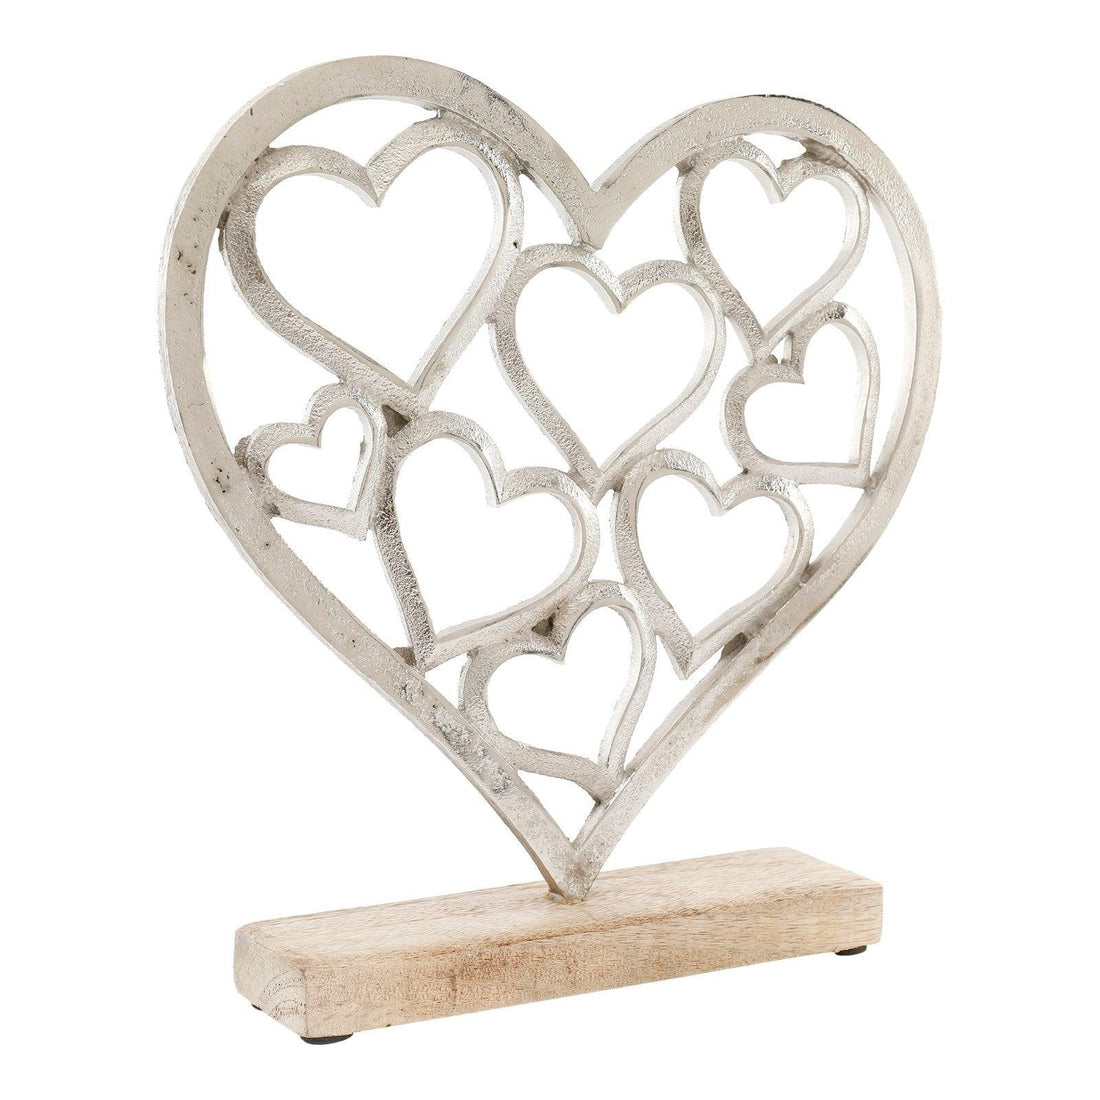 Metal Silver Hearts On A Wooden Base Large - £20.99 - Ornaments 